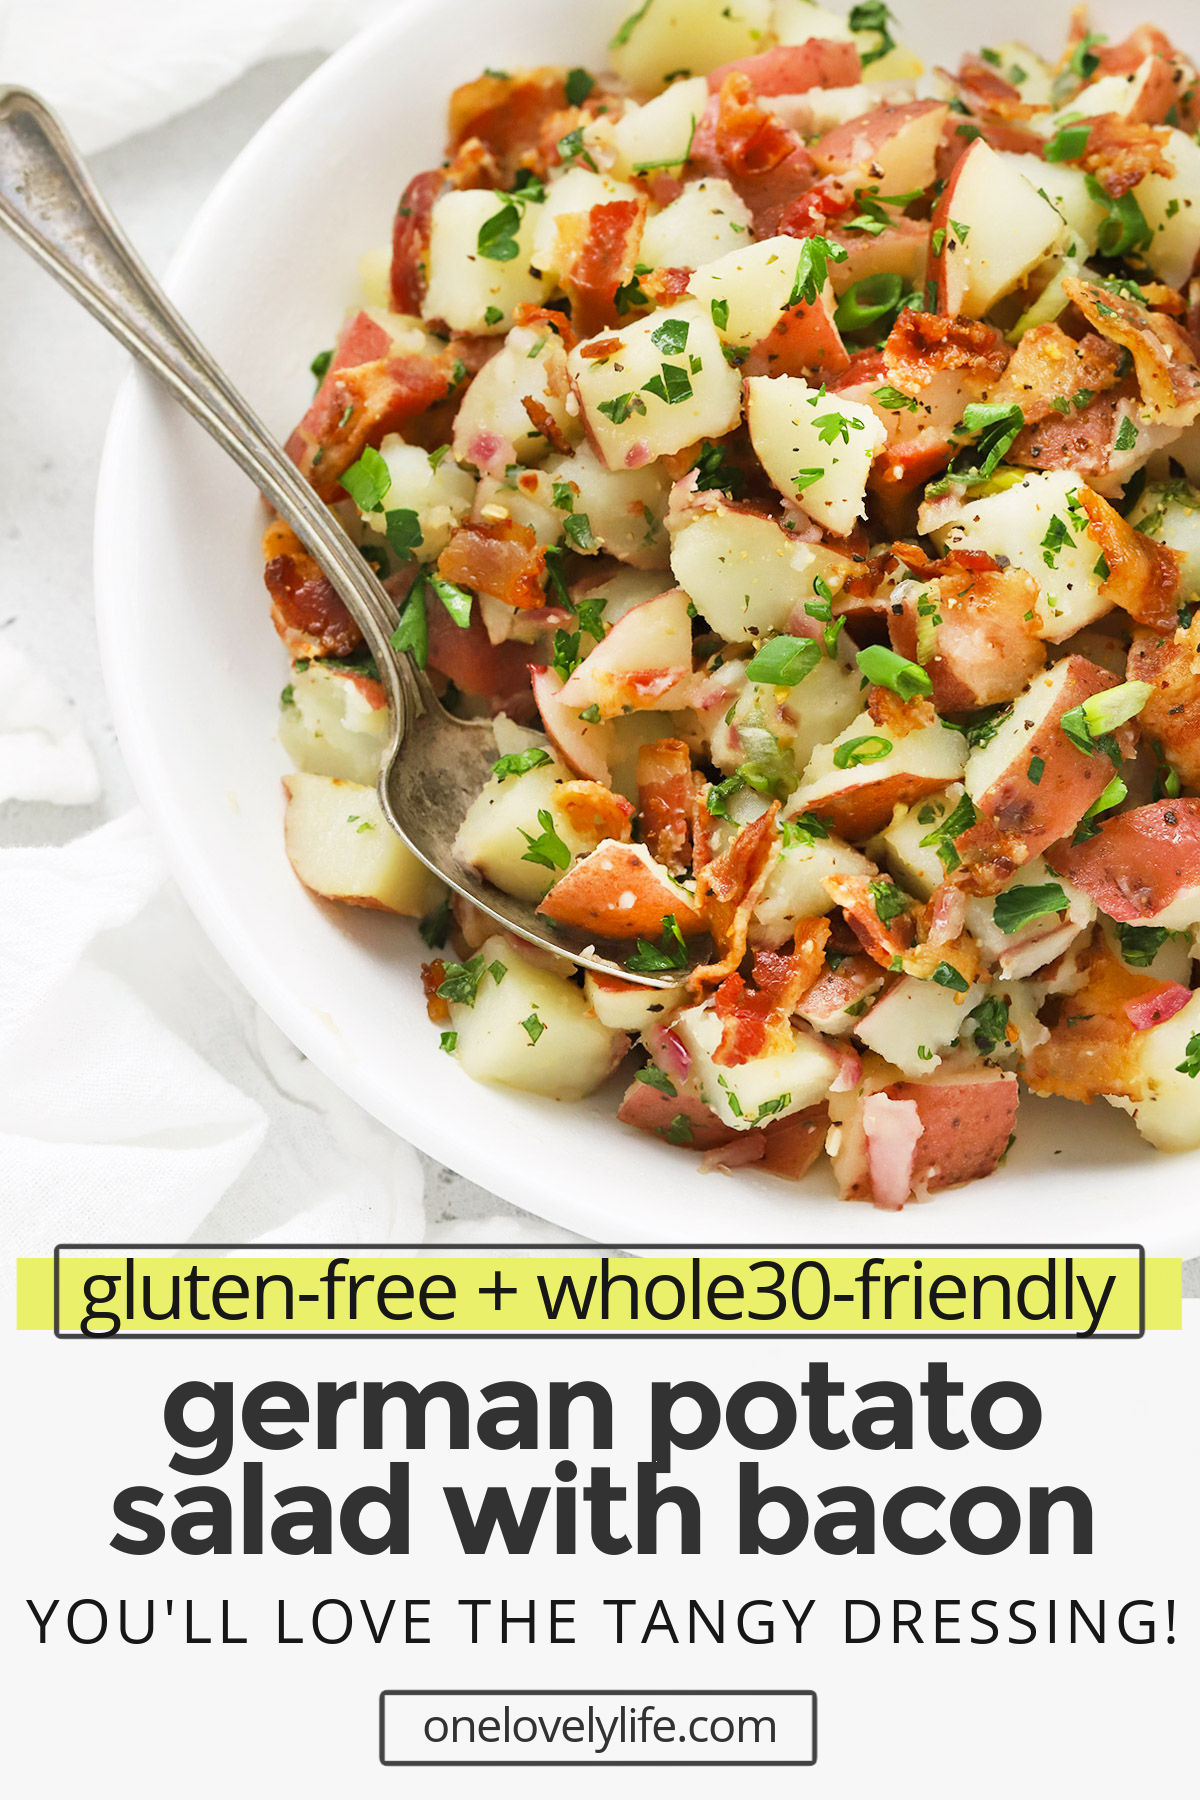 German Potato Salad - A recipe from Michael's side of the family. Tender potatoes tossed with a tangy bacon vinaigrette. It's delicious, savory & perfect all year round! (Gluten-Free, Whole30-Friendly) // Whole30 German Potato Salad // Whole30 Potato Salad // Bacon Potato Salad // Potato Salad with Bacon // Potato Salad recipe #potatosalad #summersalad #oktoberfest #glutenfree #whole30